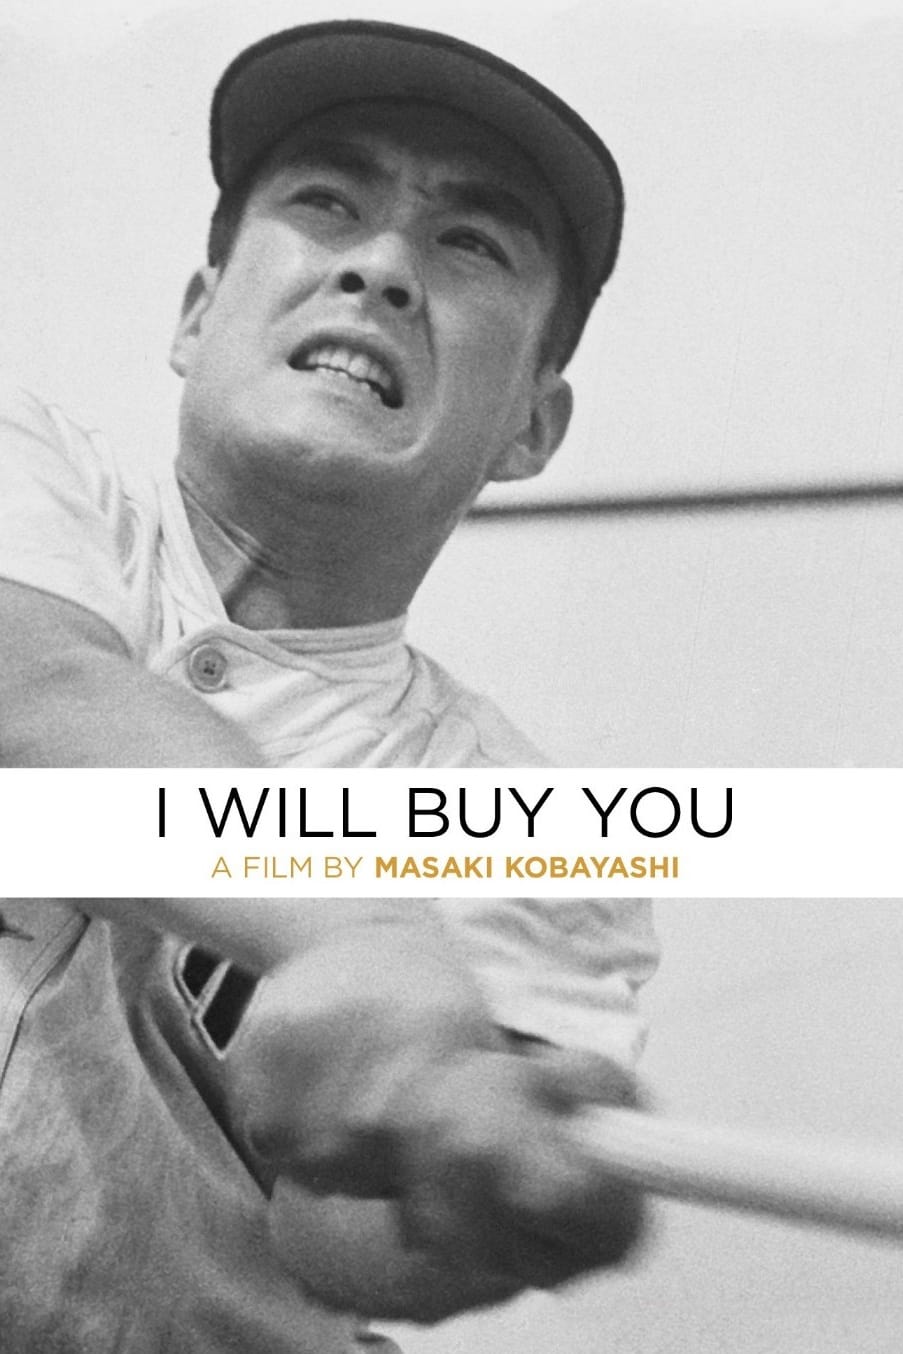 I Will Buy You (1956)